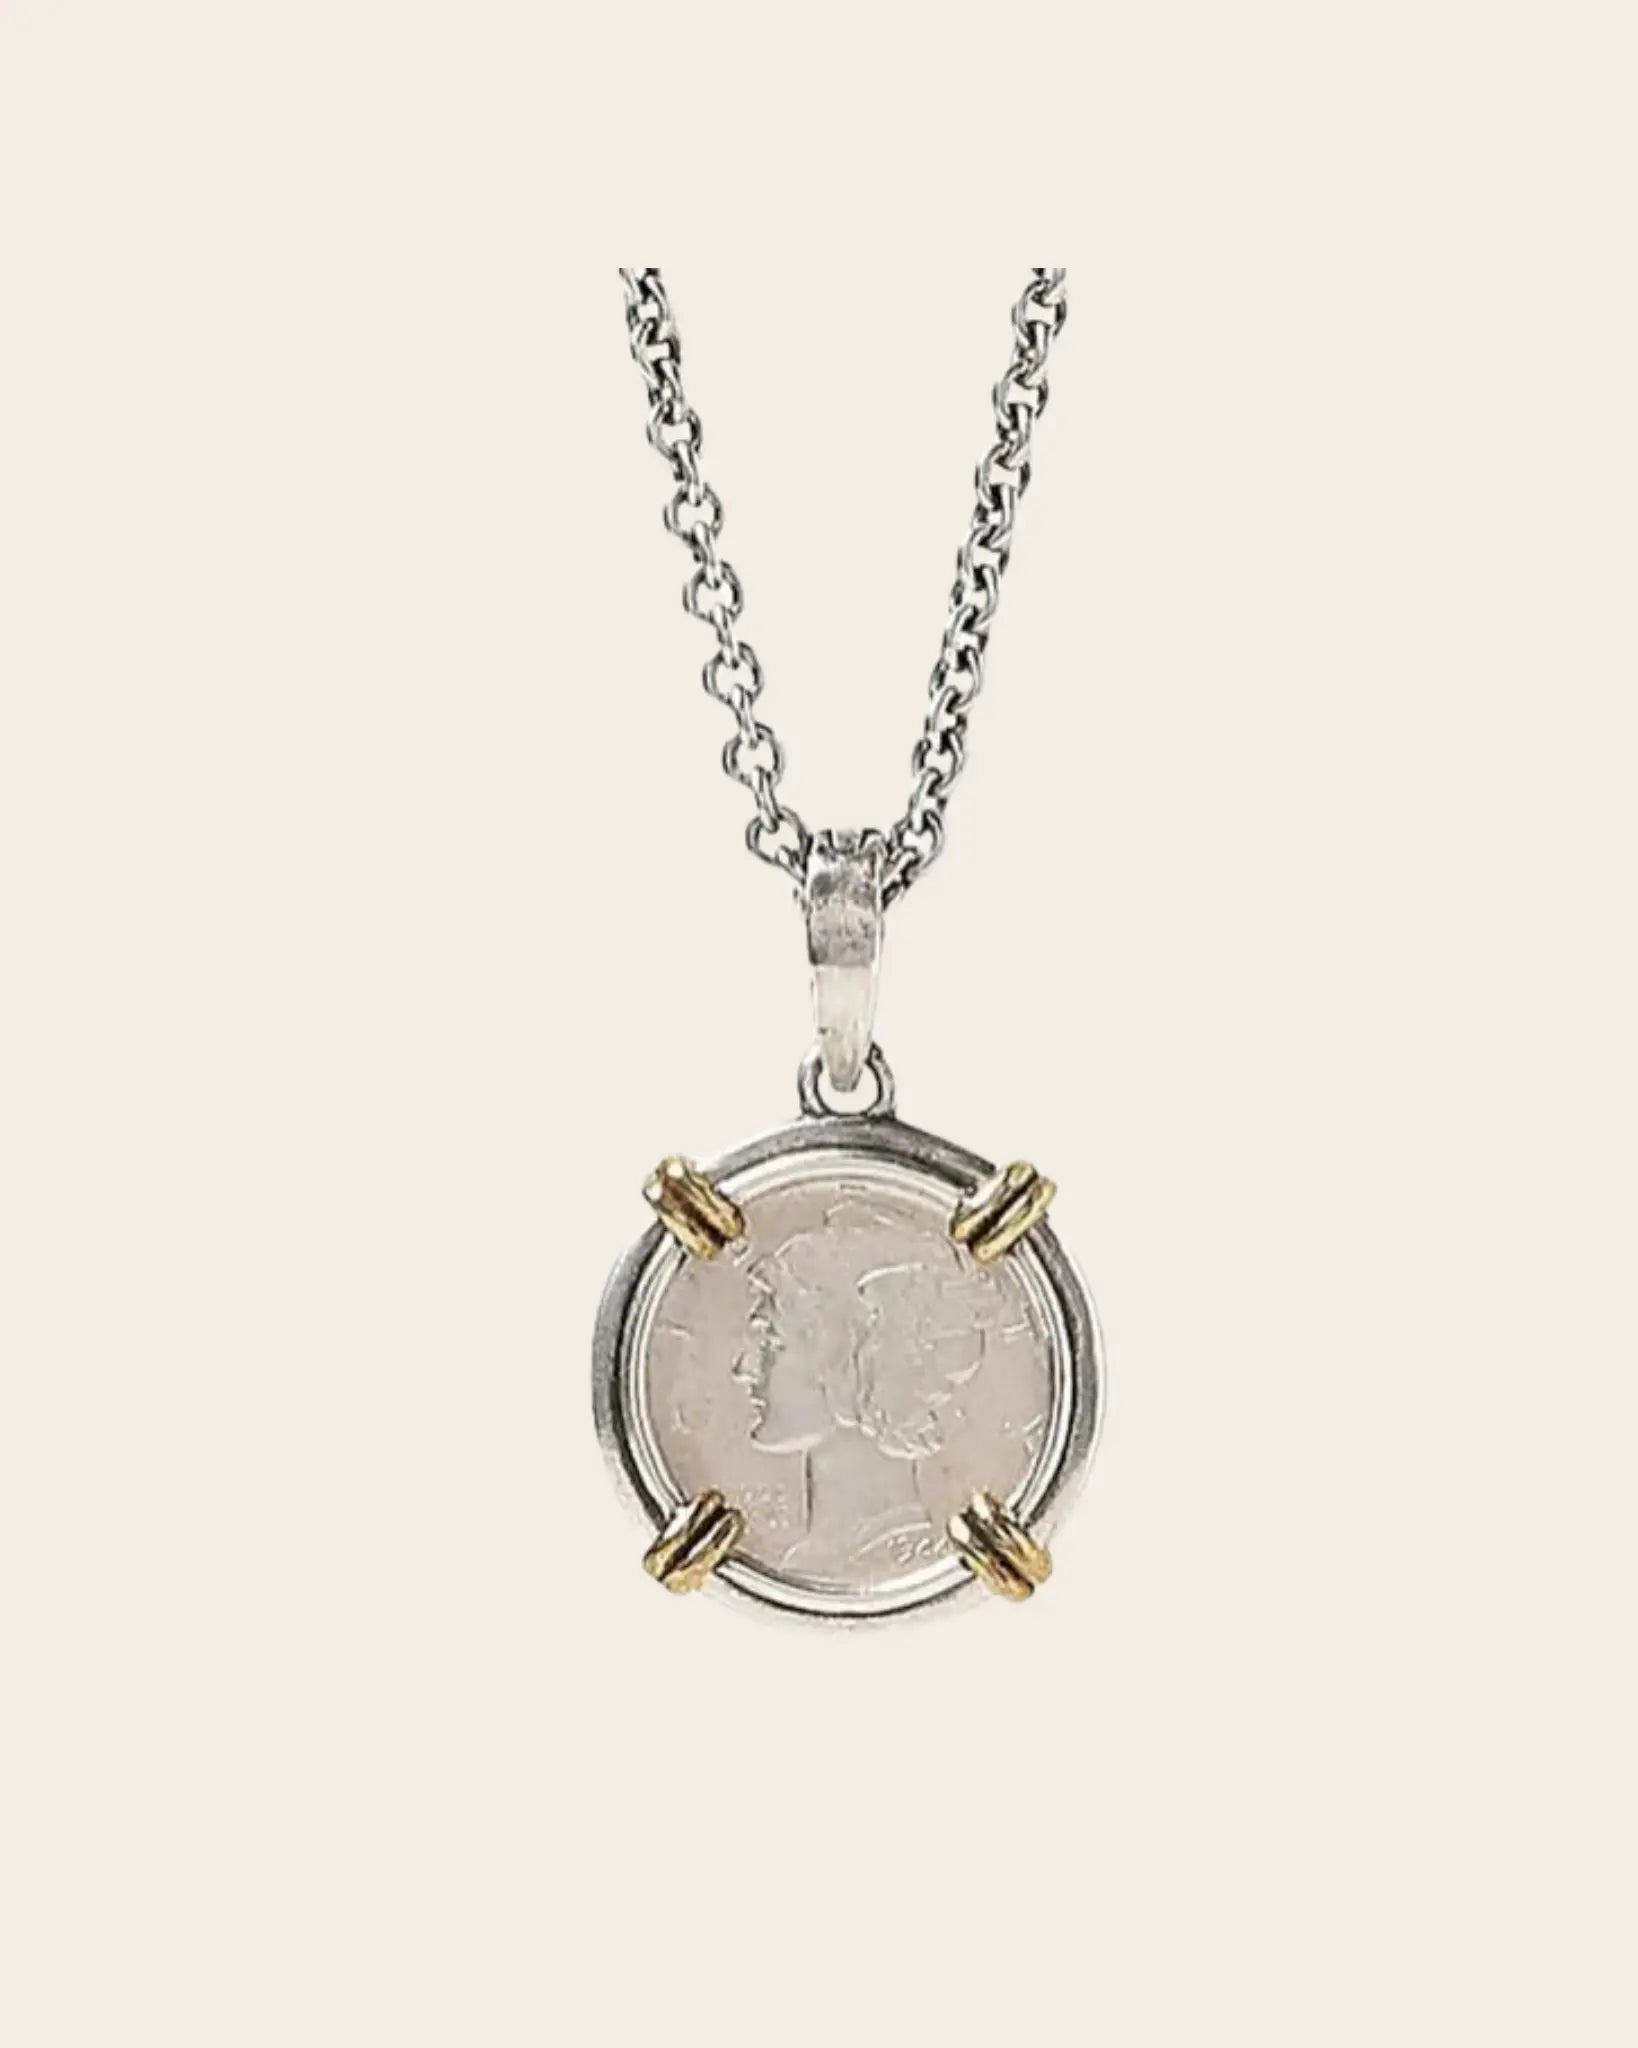 Coin Sterling Silver Pendant Necklace Coin Sterling Silver Pendant Necklace John Varvatos John Varvatos  Squash Blossom Vail